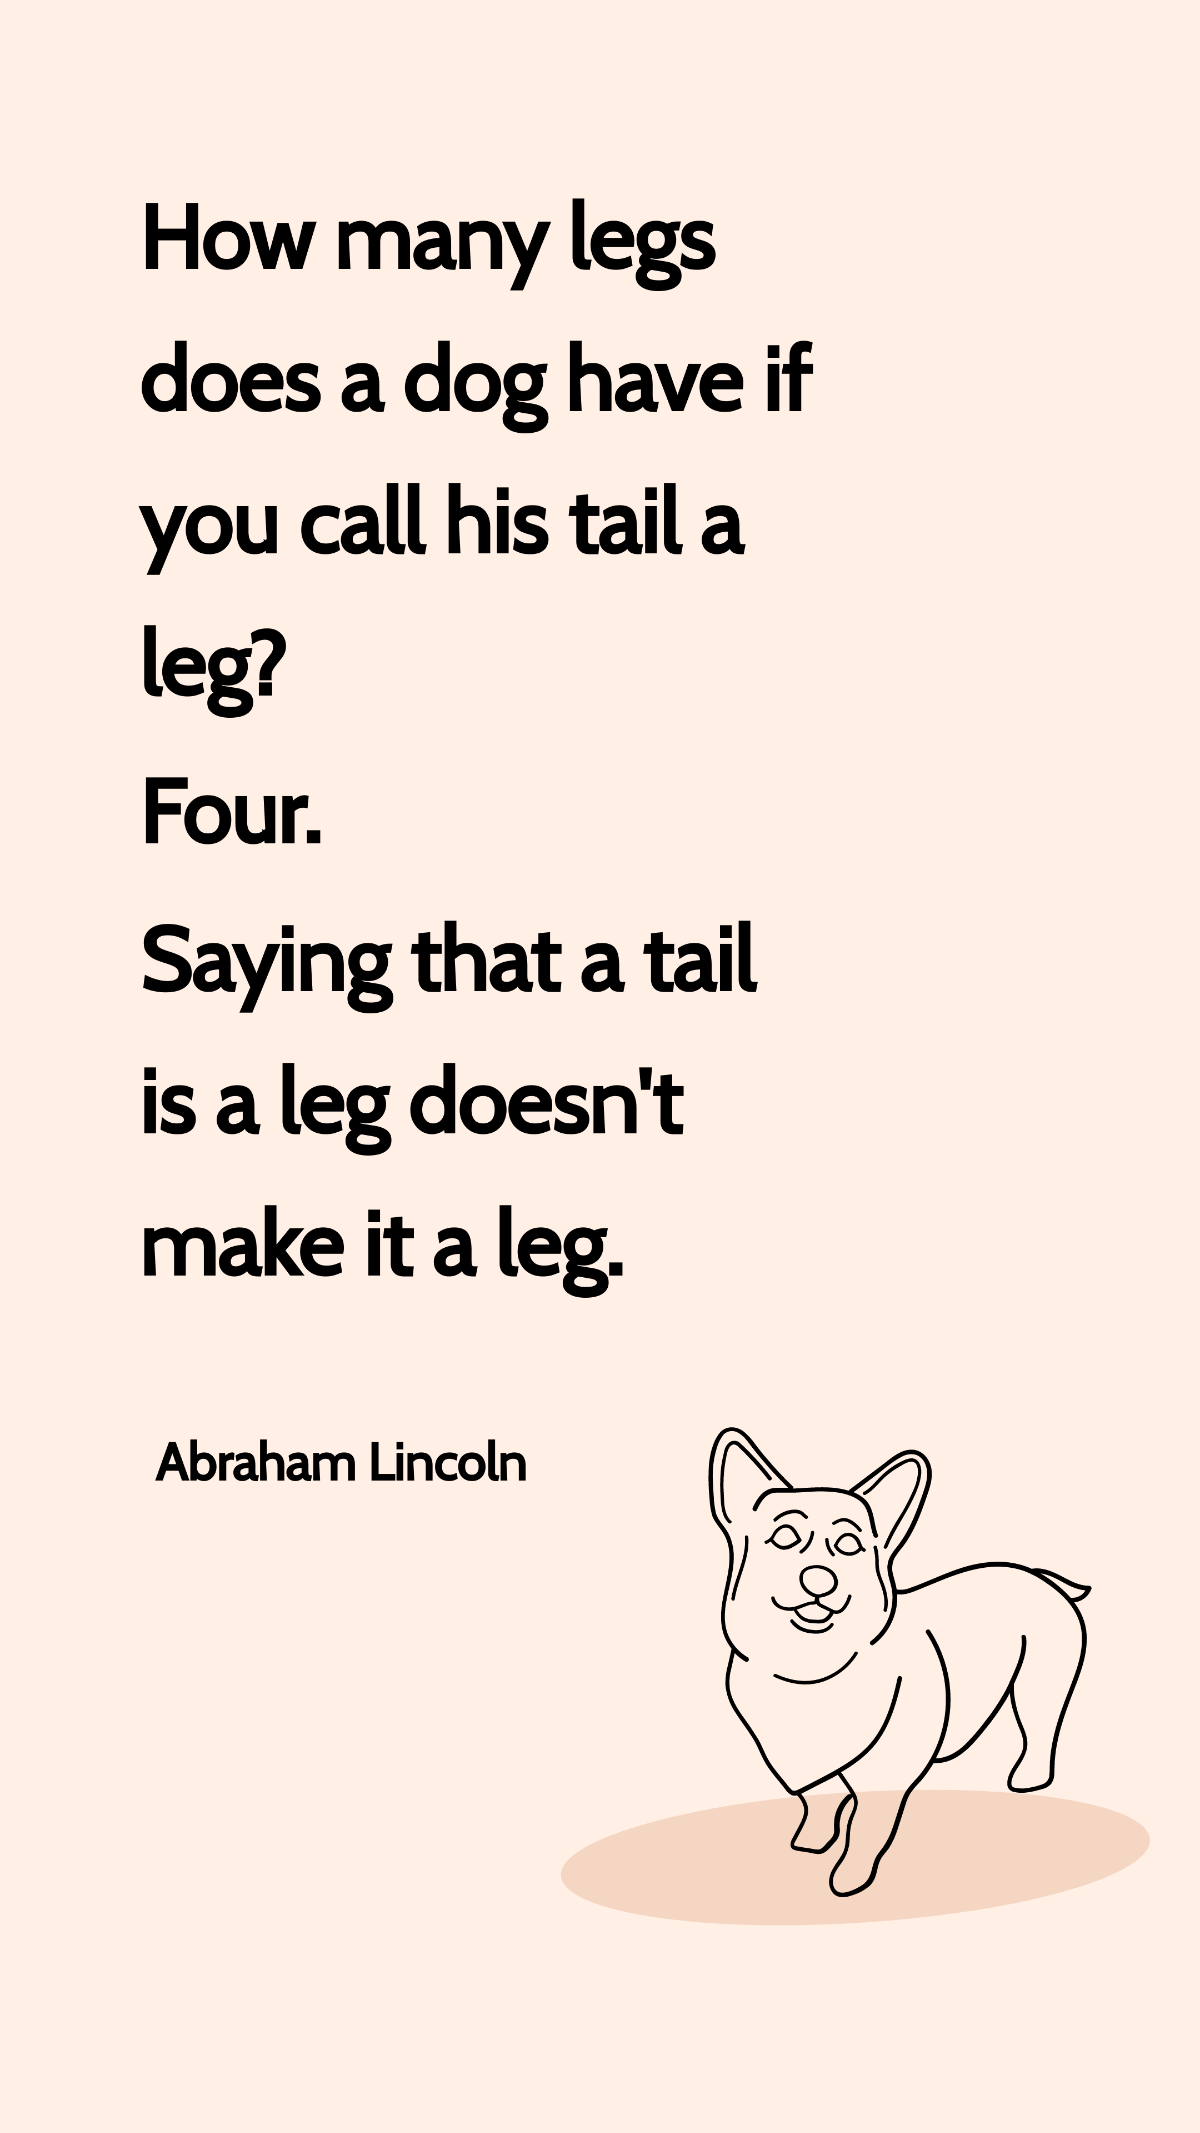 Abraham Lincoln - How many legs does a dog have if you call his tail a leg? Four. Saying that a tail is a leg doesn't make it a leg.